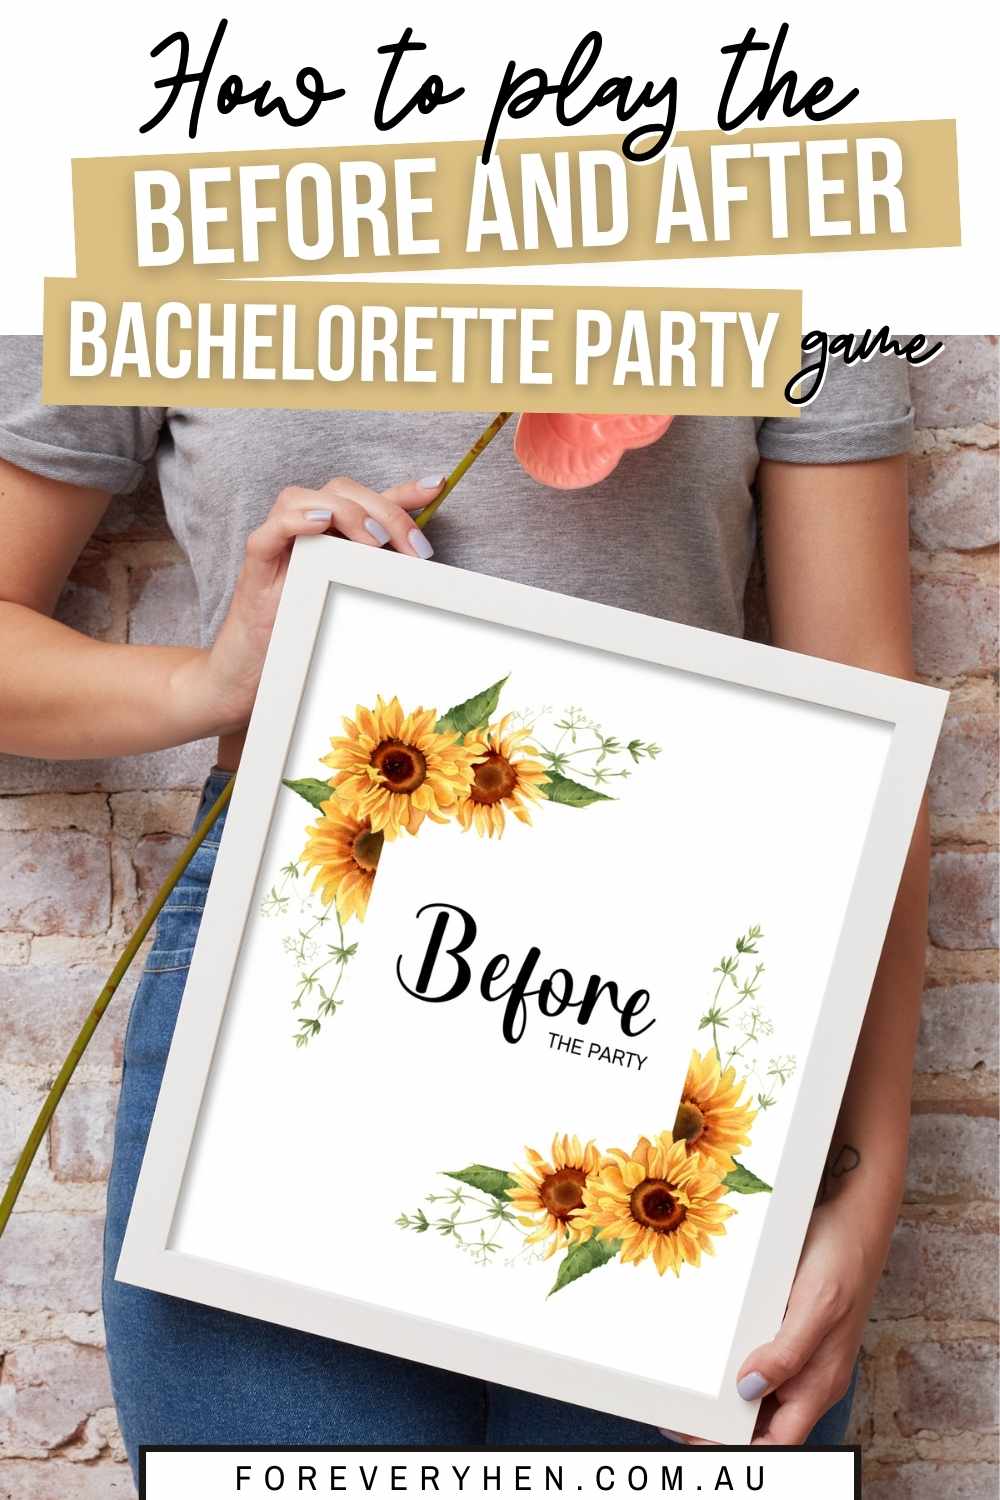 Before and After Bachelorette Party Game Pinterest